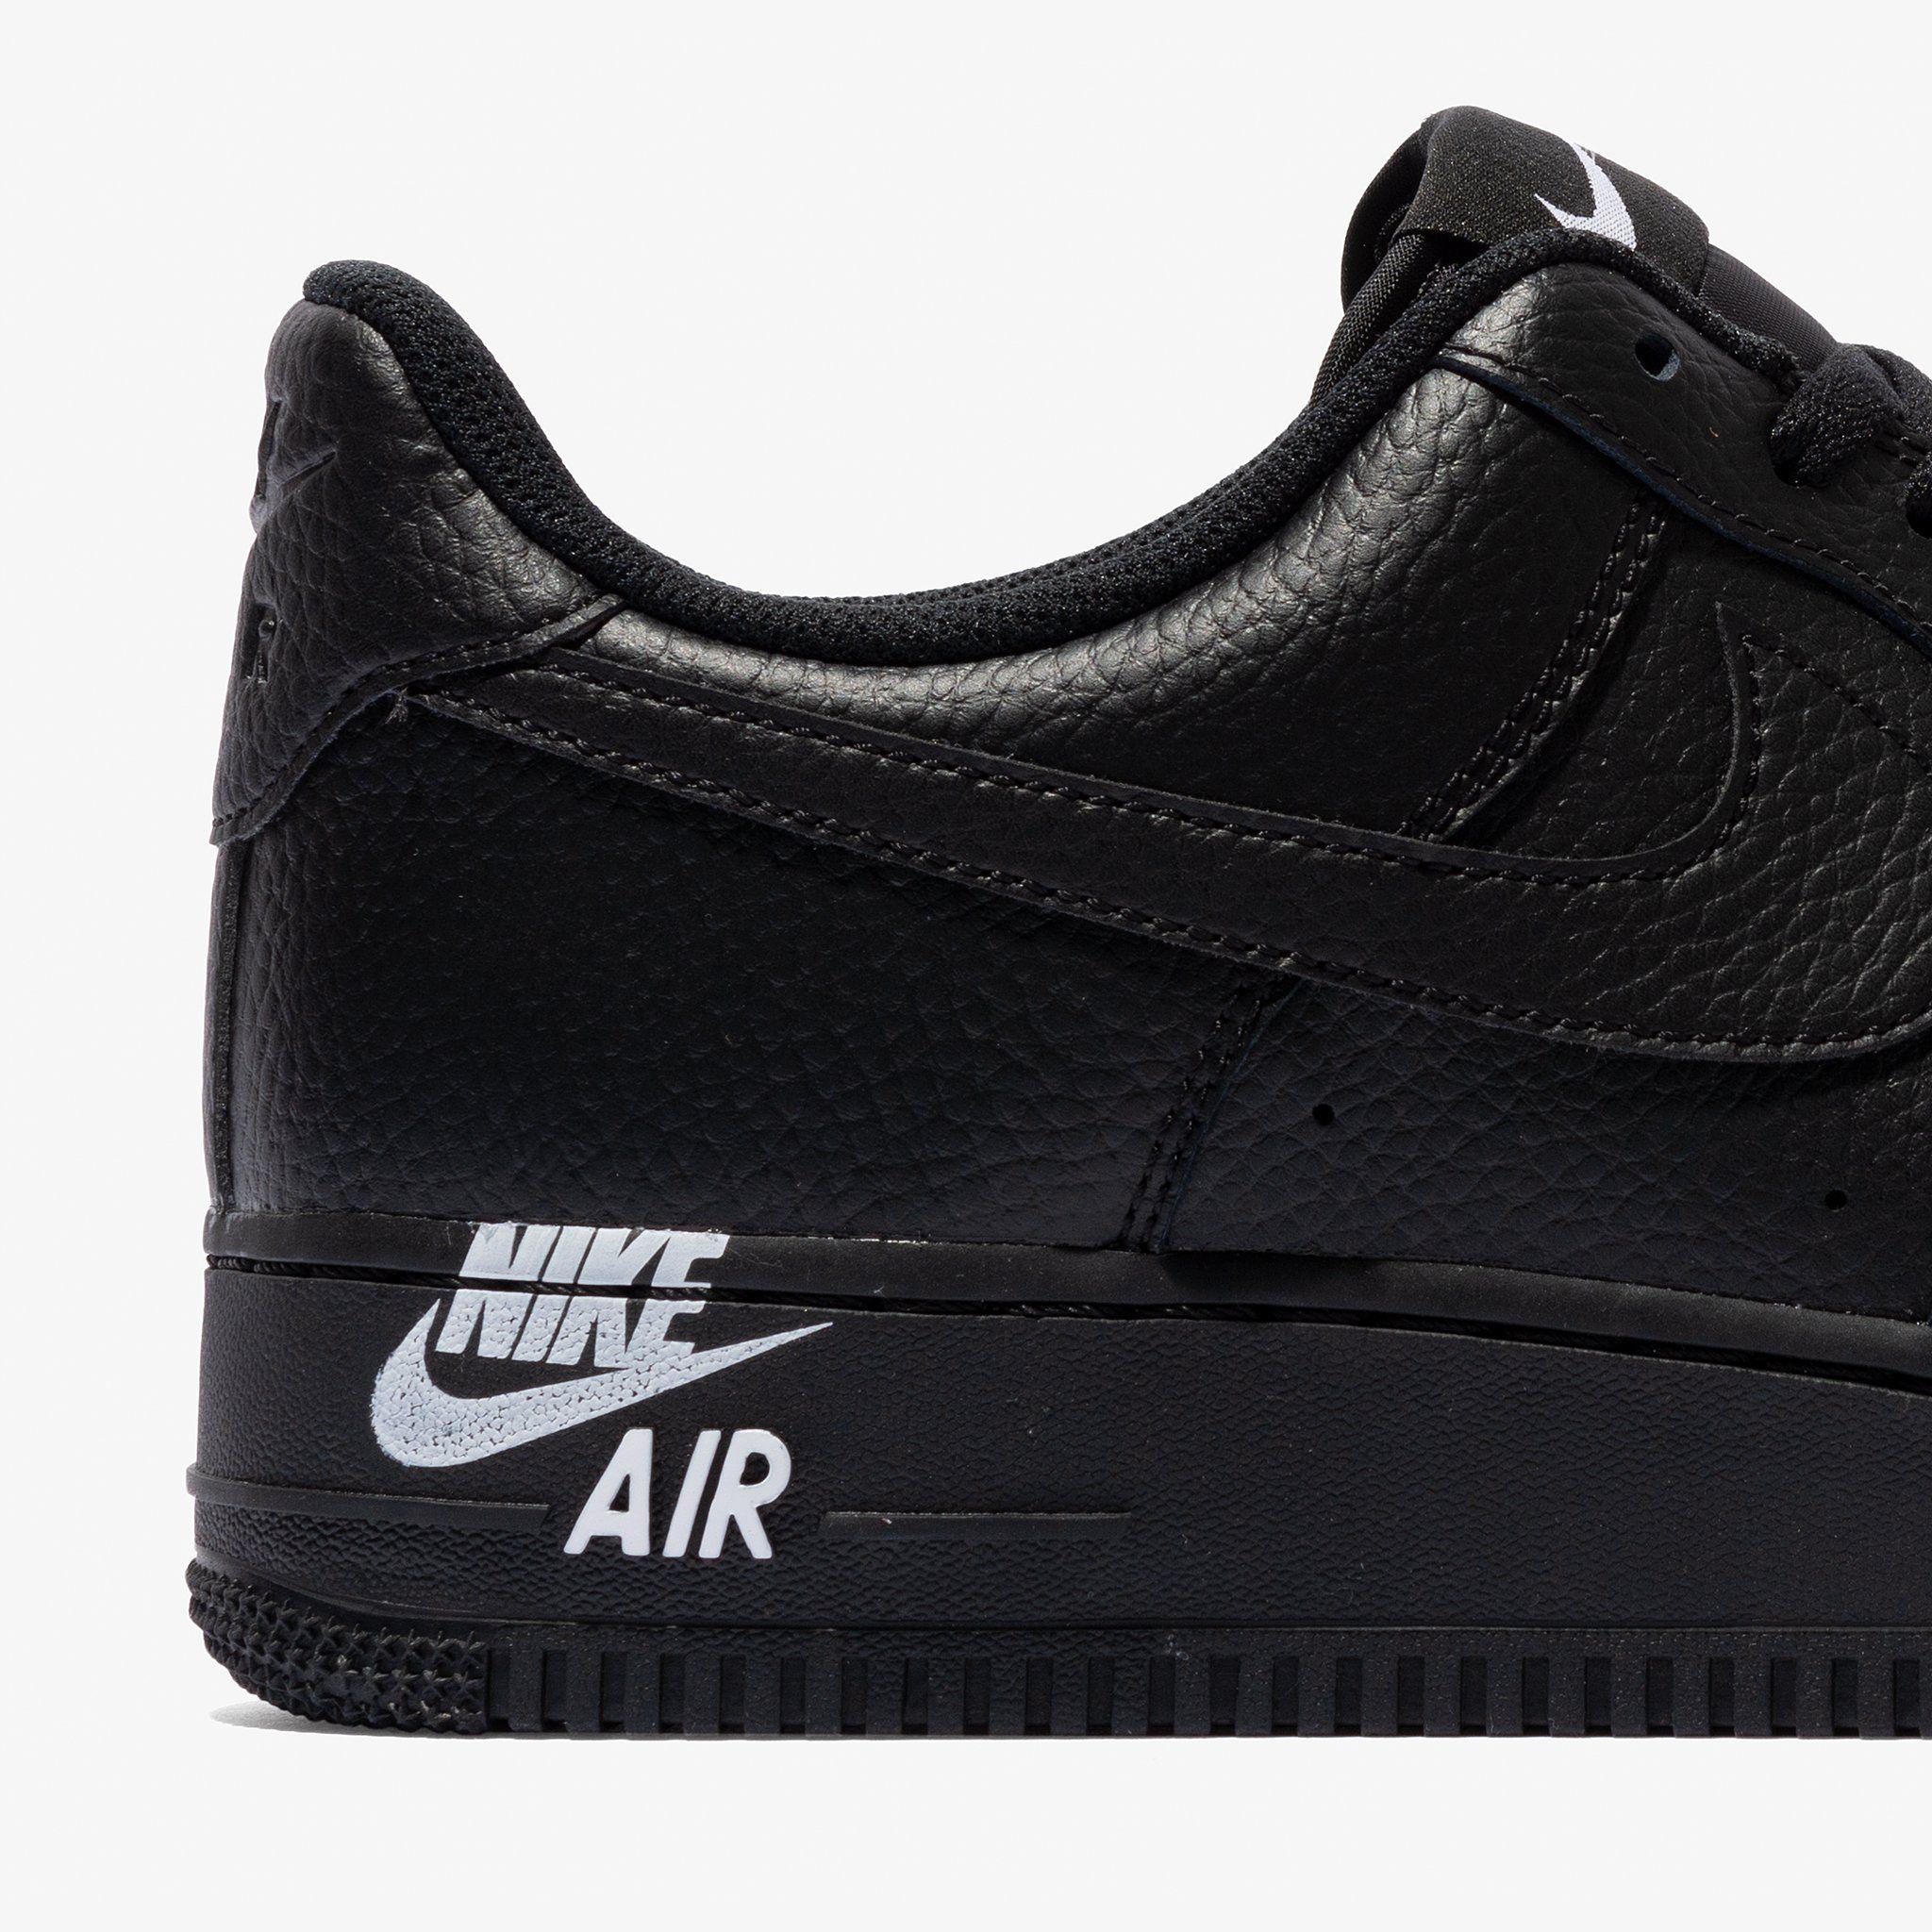 Air Force 1 Logo - Nike Air Force 1 Stamp Logo Follows With A Triple Black Rendition